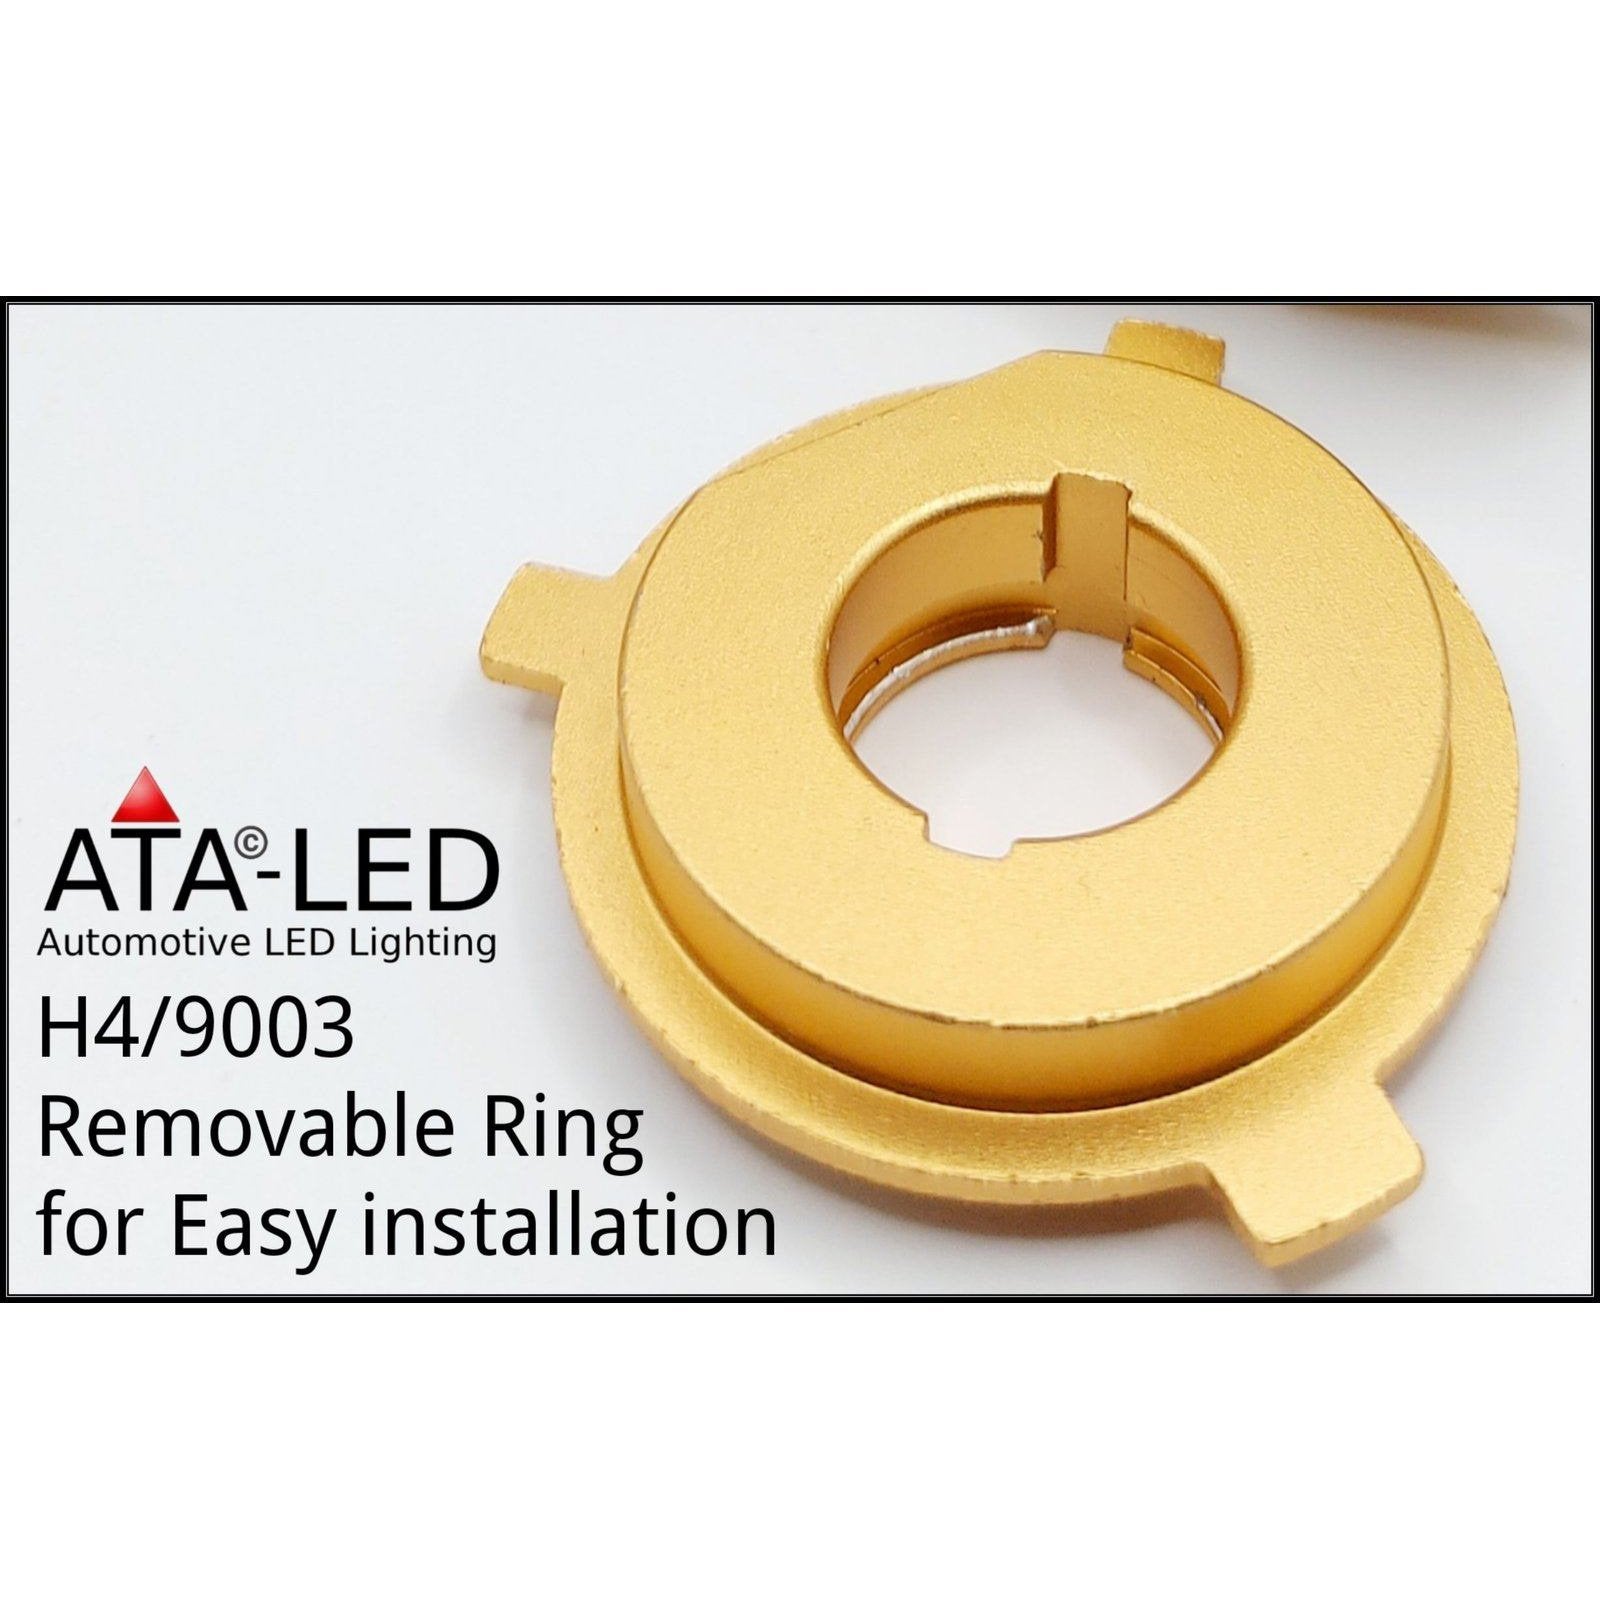 H4 9003 Removable Ring for Easy Installation